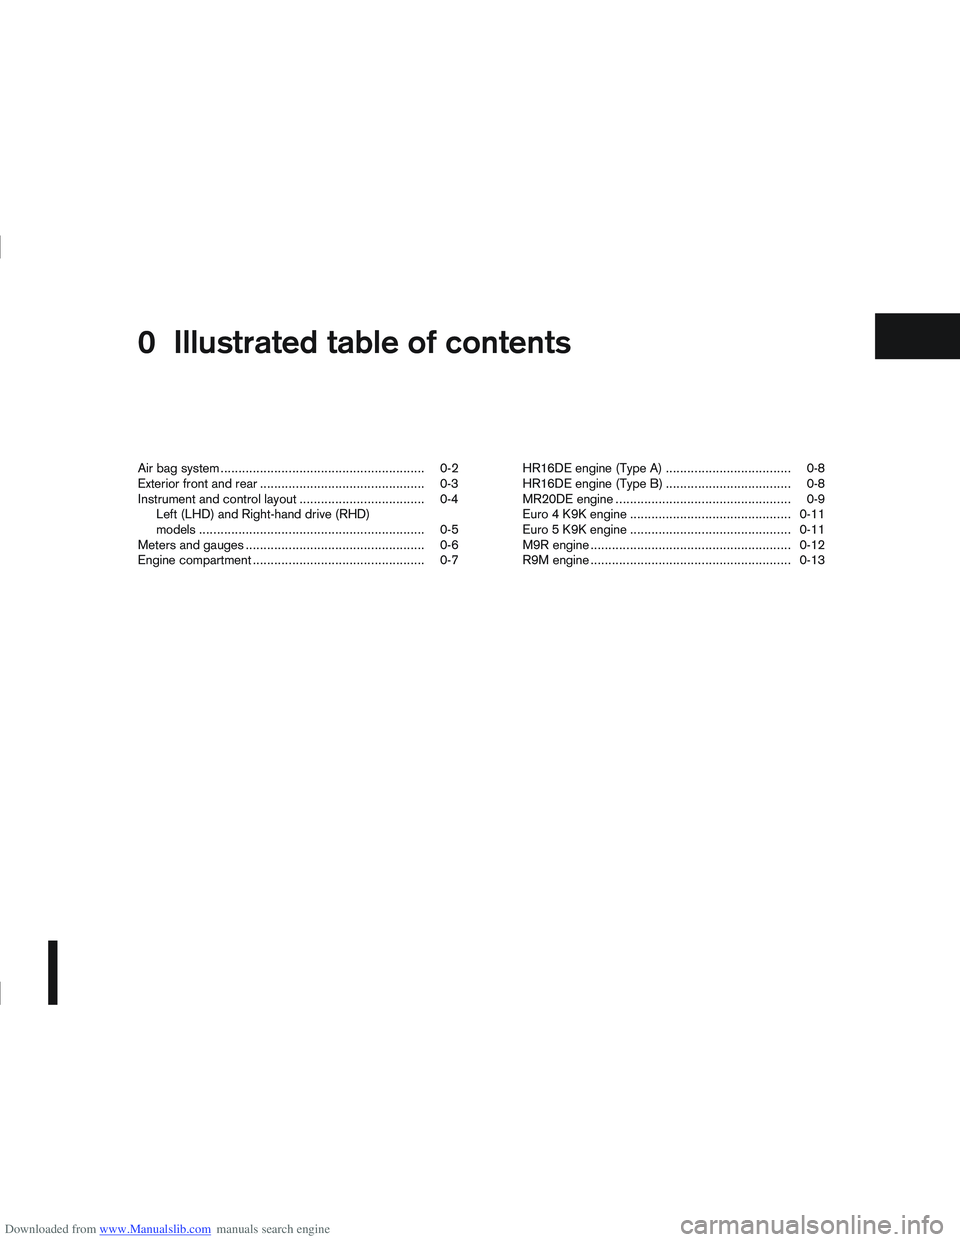 NISSAN QASHQAI 2007  Owners Manual Downloaded from www.Manualslib.com manuals search engine 0Illustrated table of contents
Illustrated table of contents
Air bag system ......................................................... 0-2
Exter